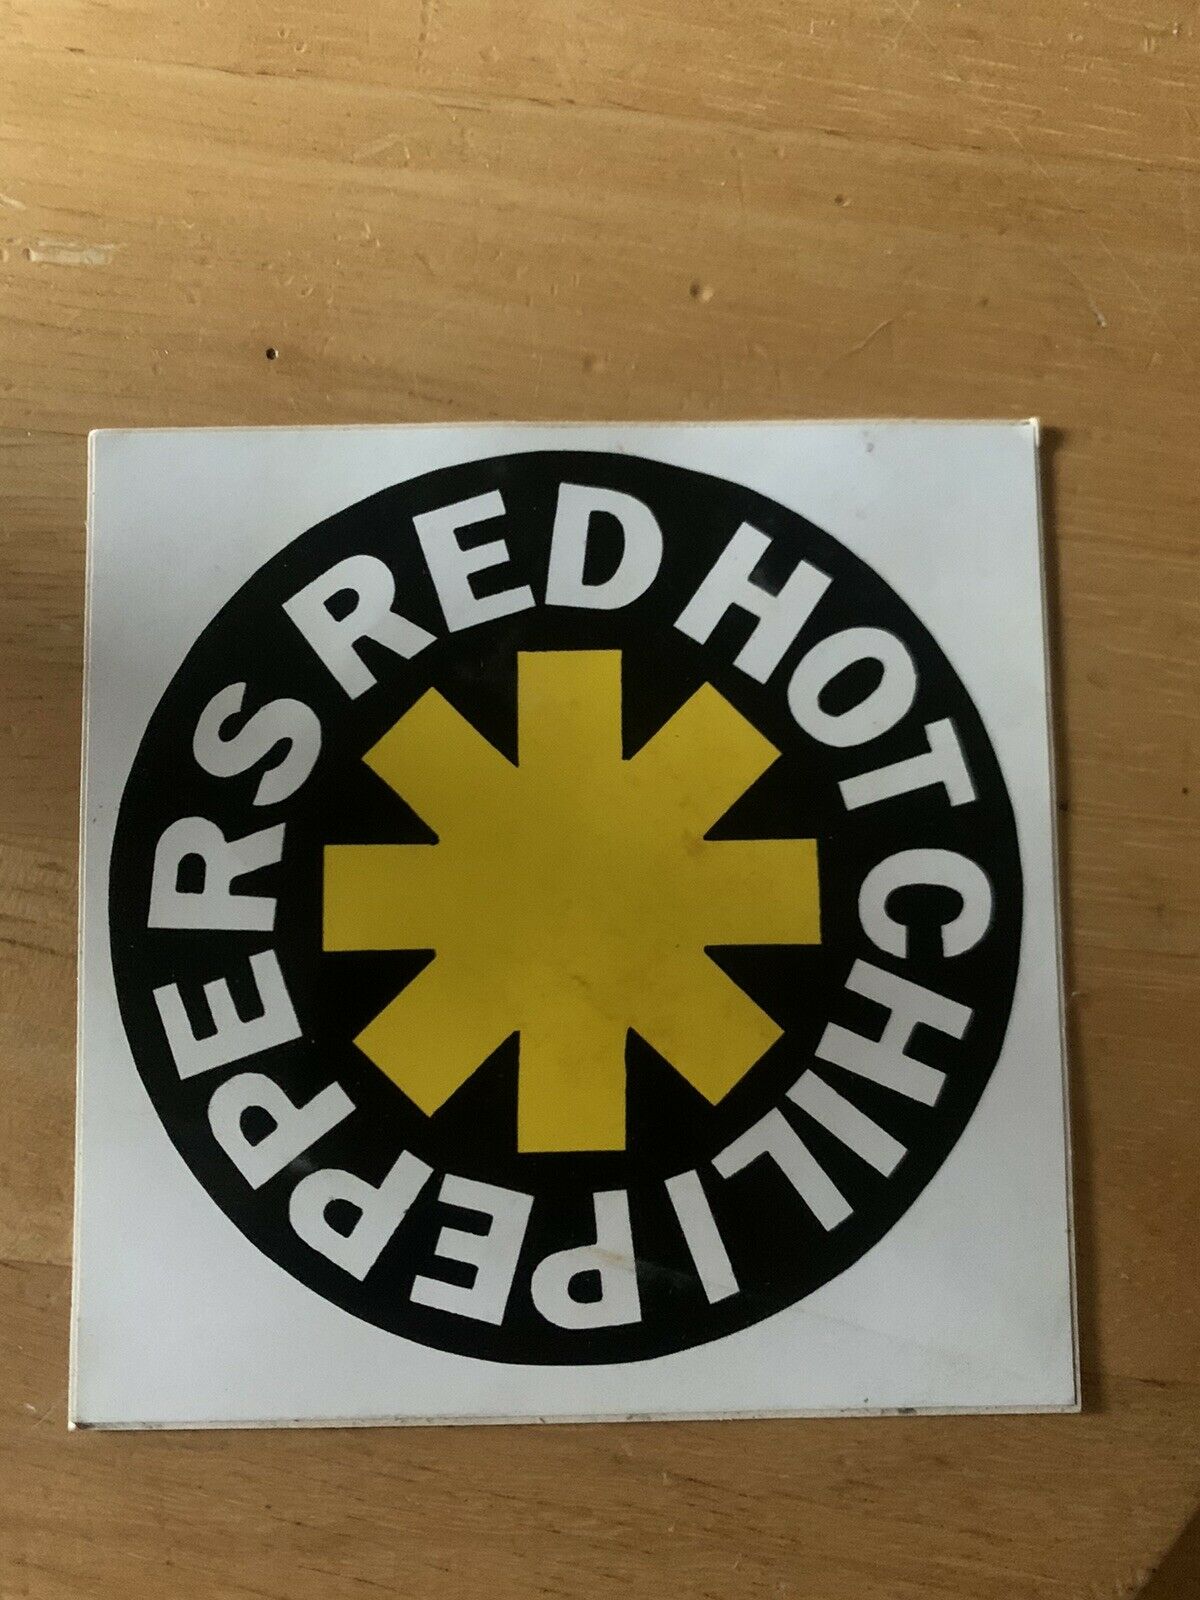 Red Hot Chili Peppers Logo Sticker New 4.5” Rare Vintage 1990's Decal